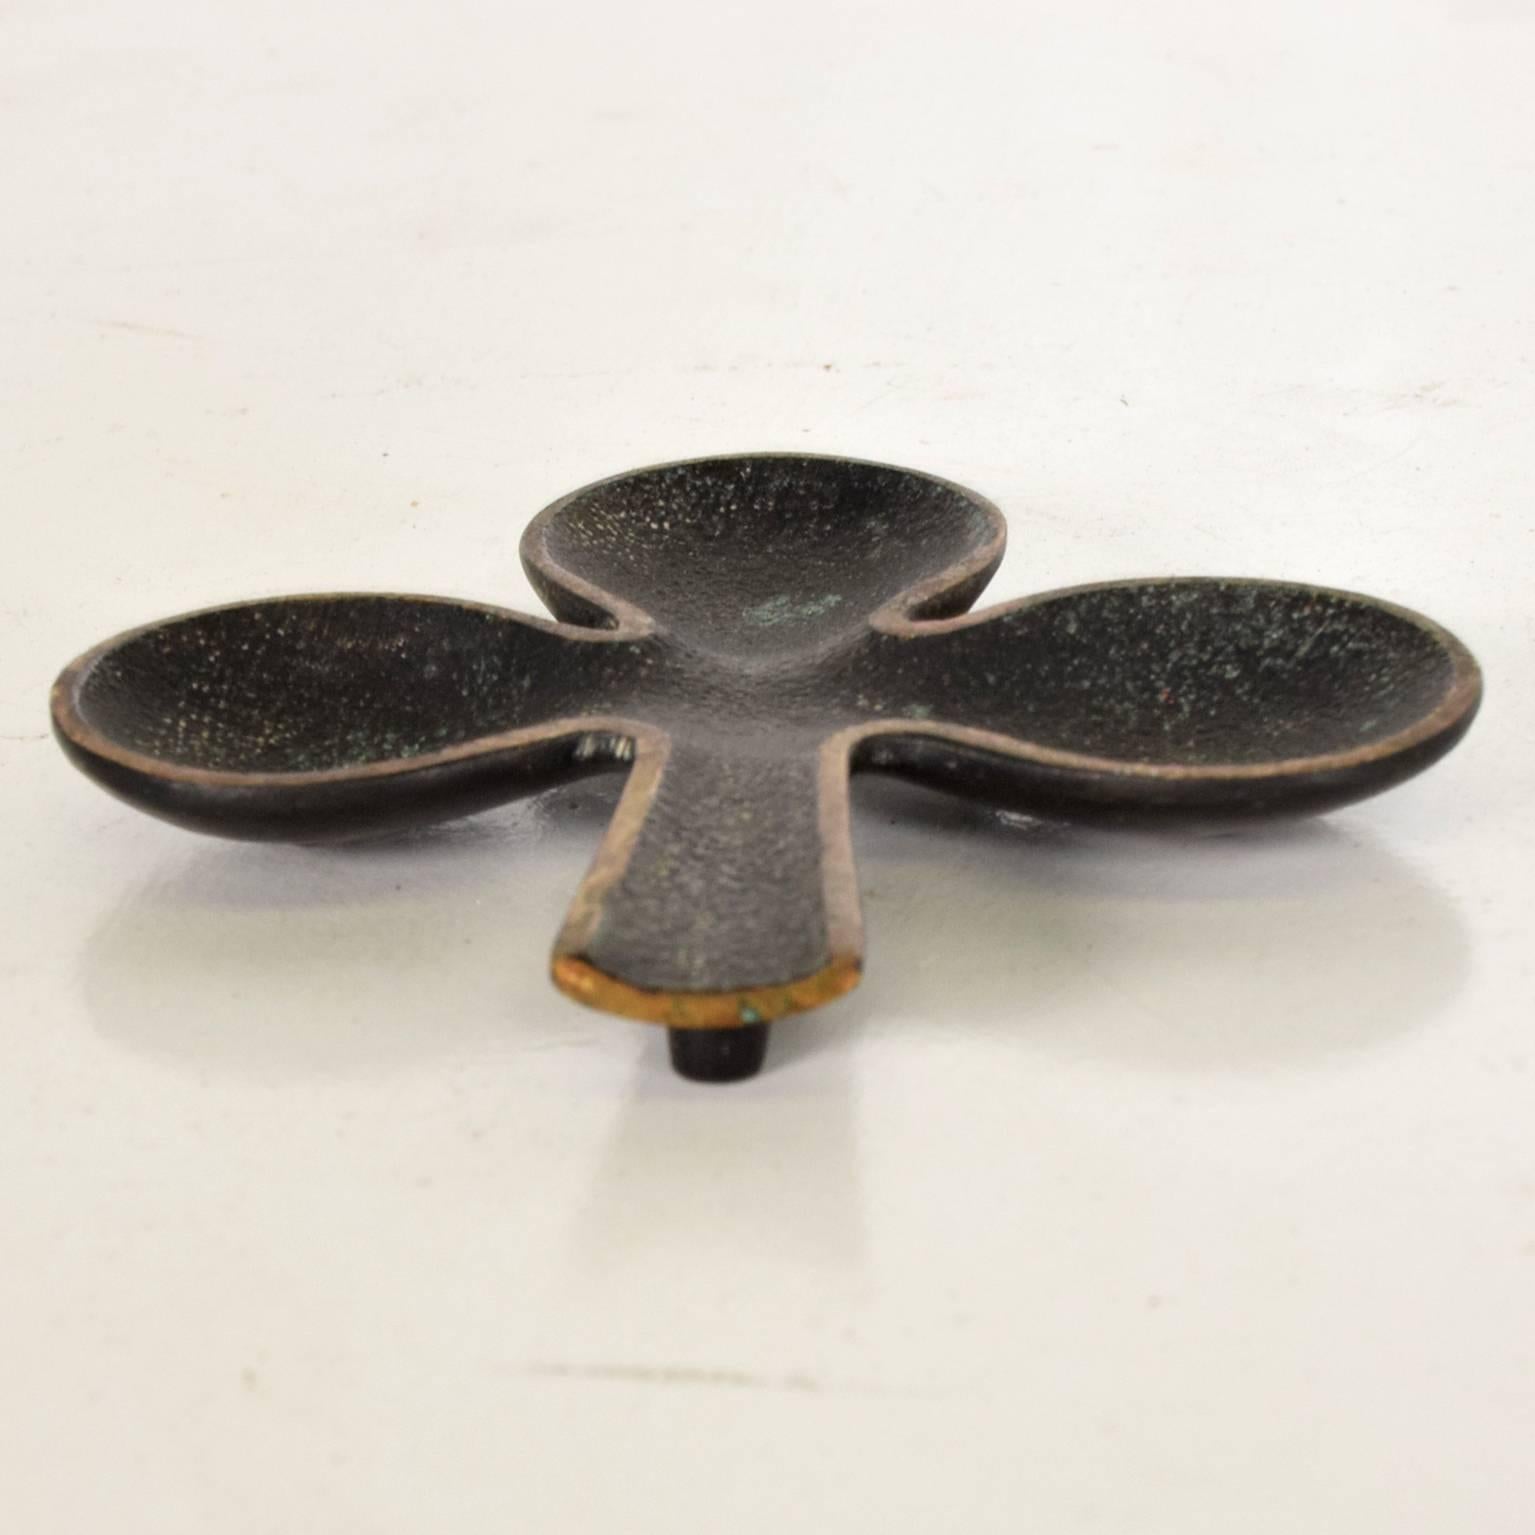 For your consideration a beautiful bronze clover ashtray by Richard Rohac.
Austria, 1950s.
Marked RR (Richard Rohac) Made in Austria.
Measures: 1/2